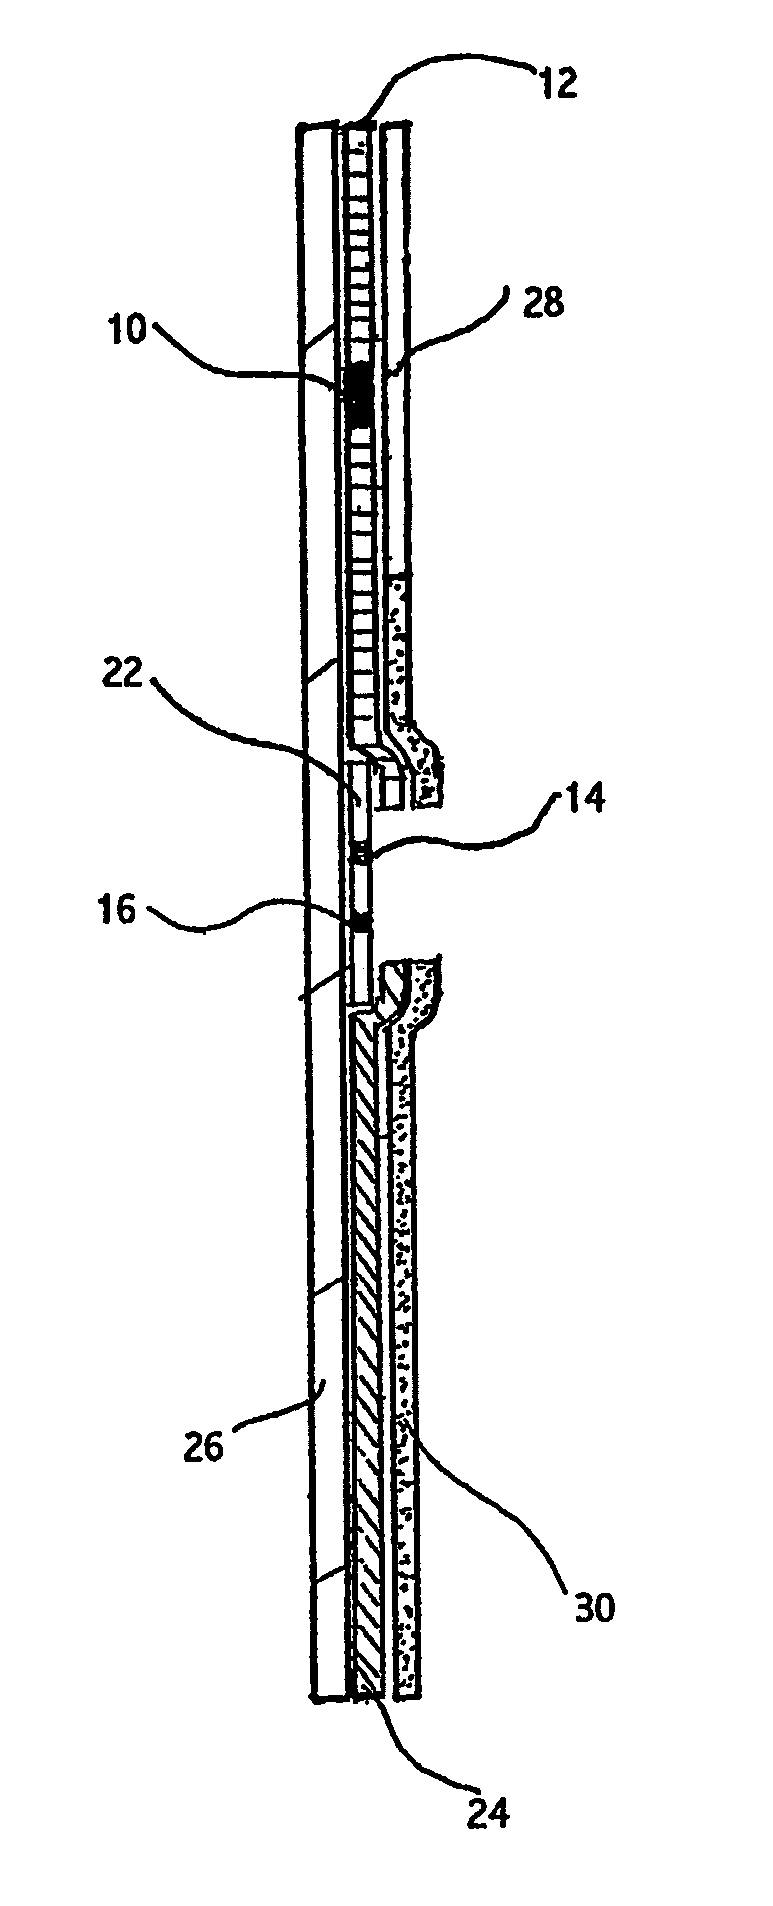 Devices and methods for detecting amniotic fluid in vaginal secretions